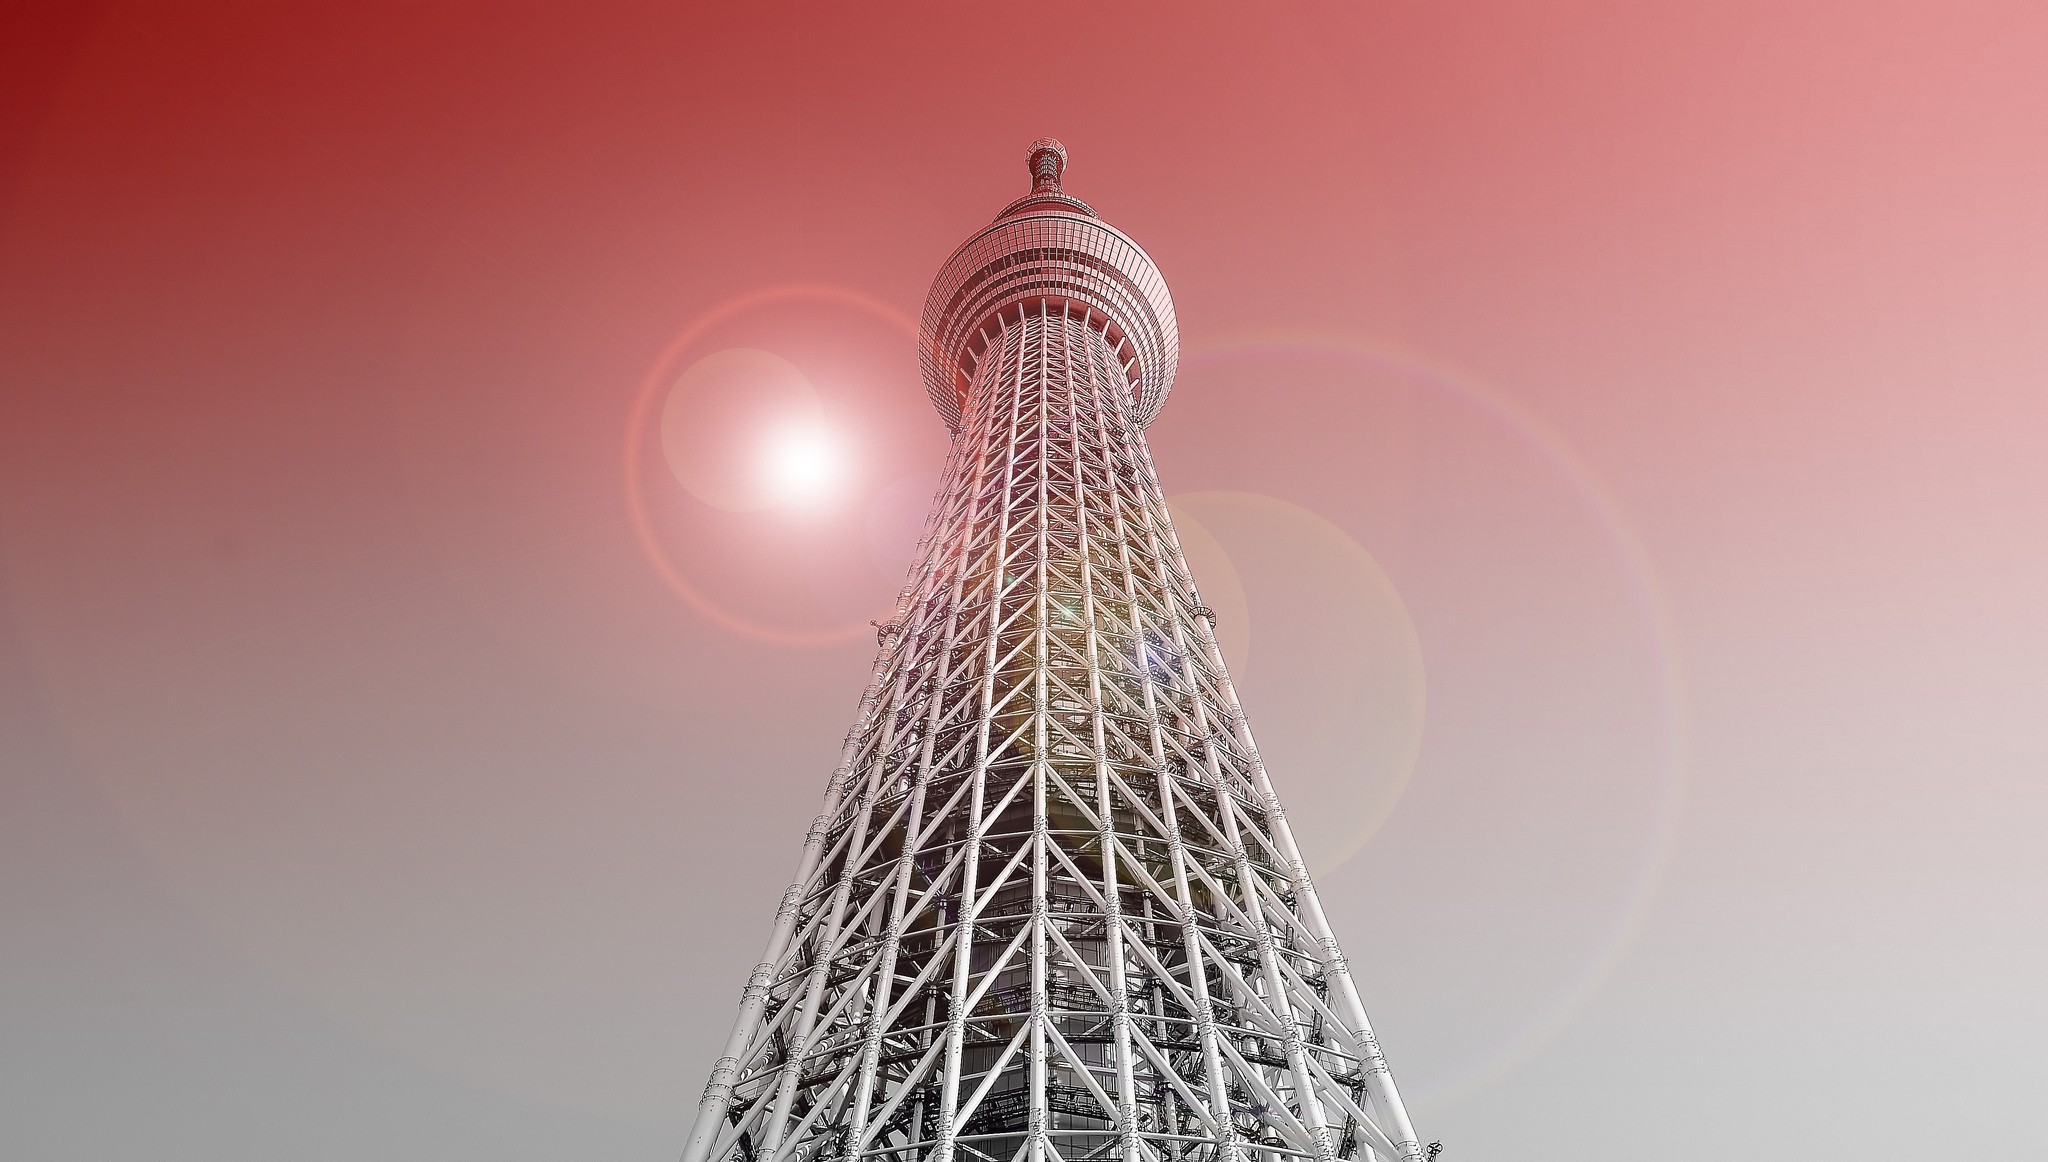 General 2048x1162 tower Japan Tokyo lens flare gradient architecture low-angle Asia worm's eye view construction